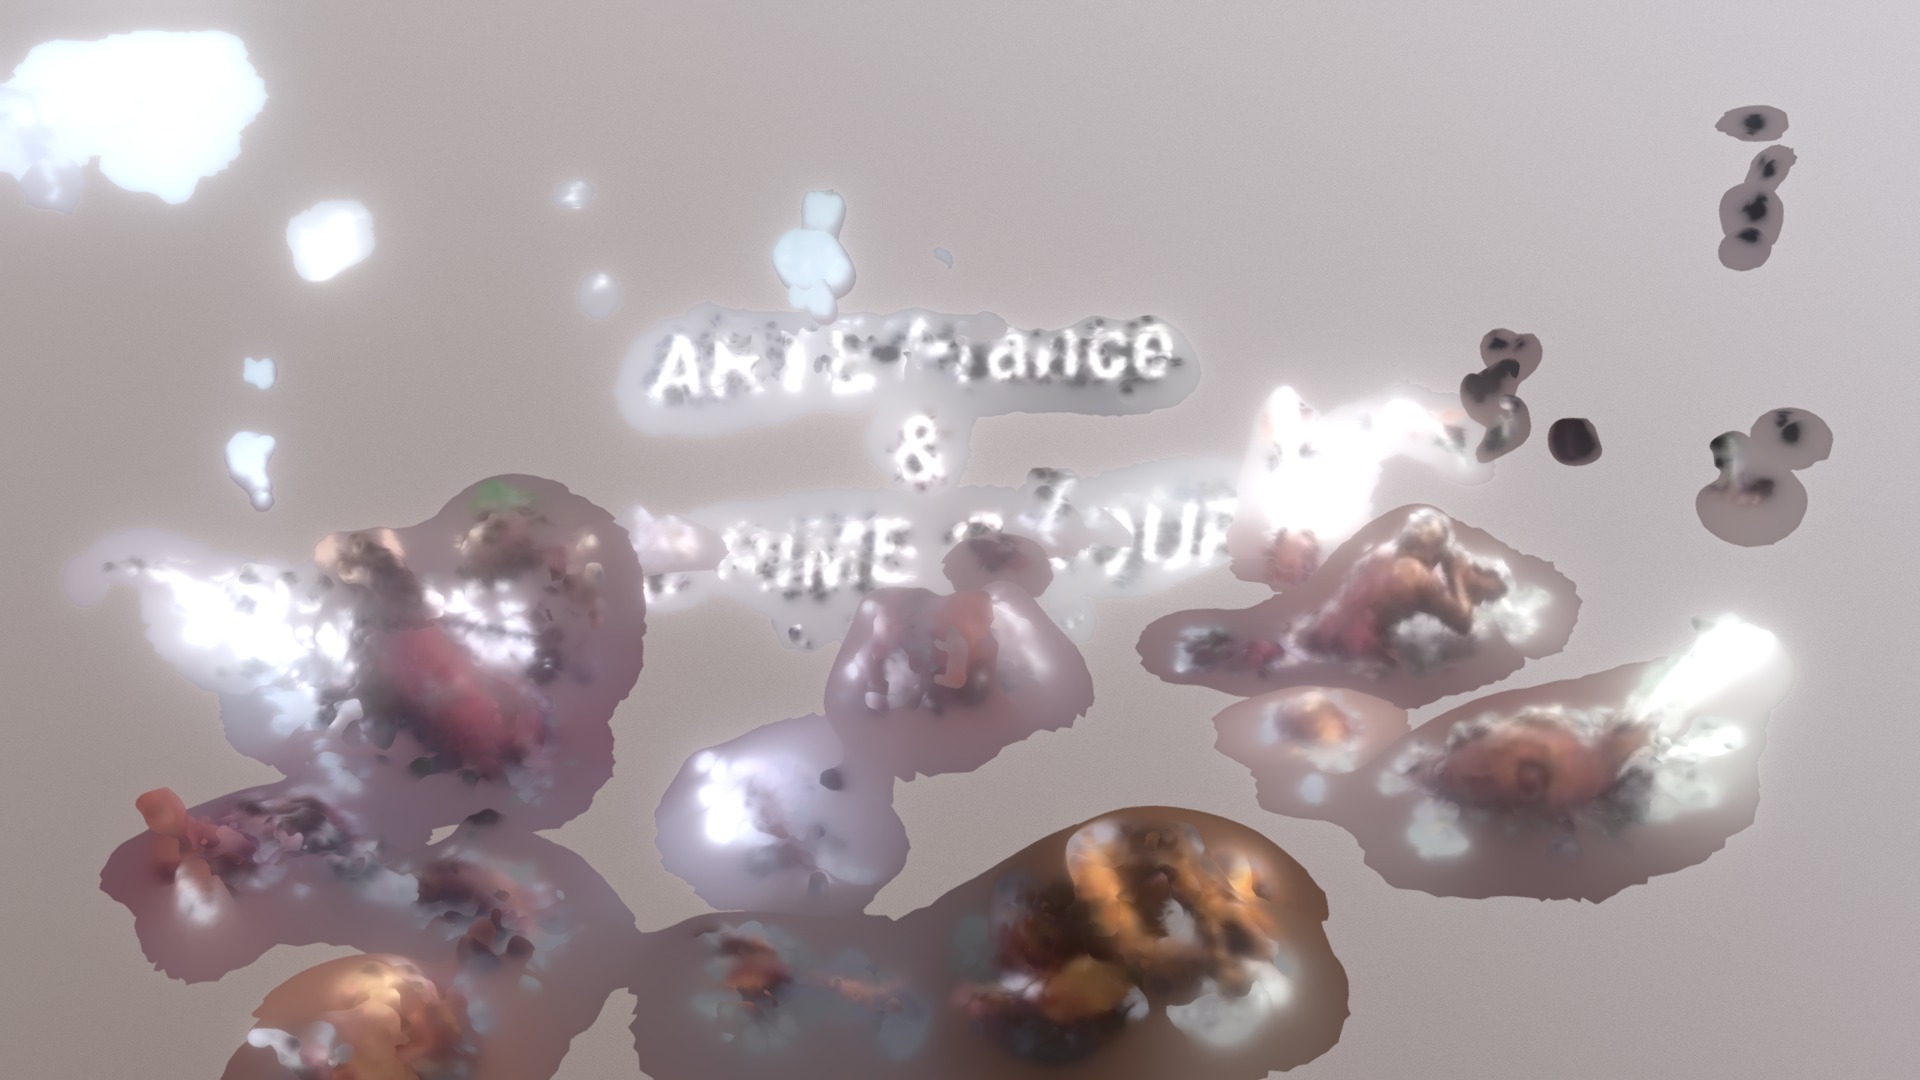 3D model Art France - This is a 3D model of the Art France. The 3D model is about a group of jellyfish.